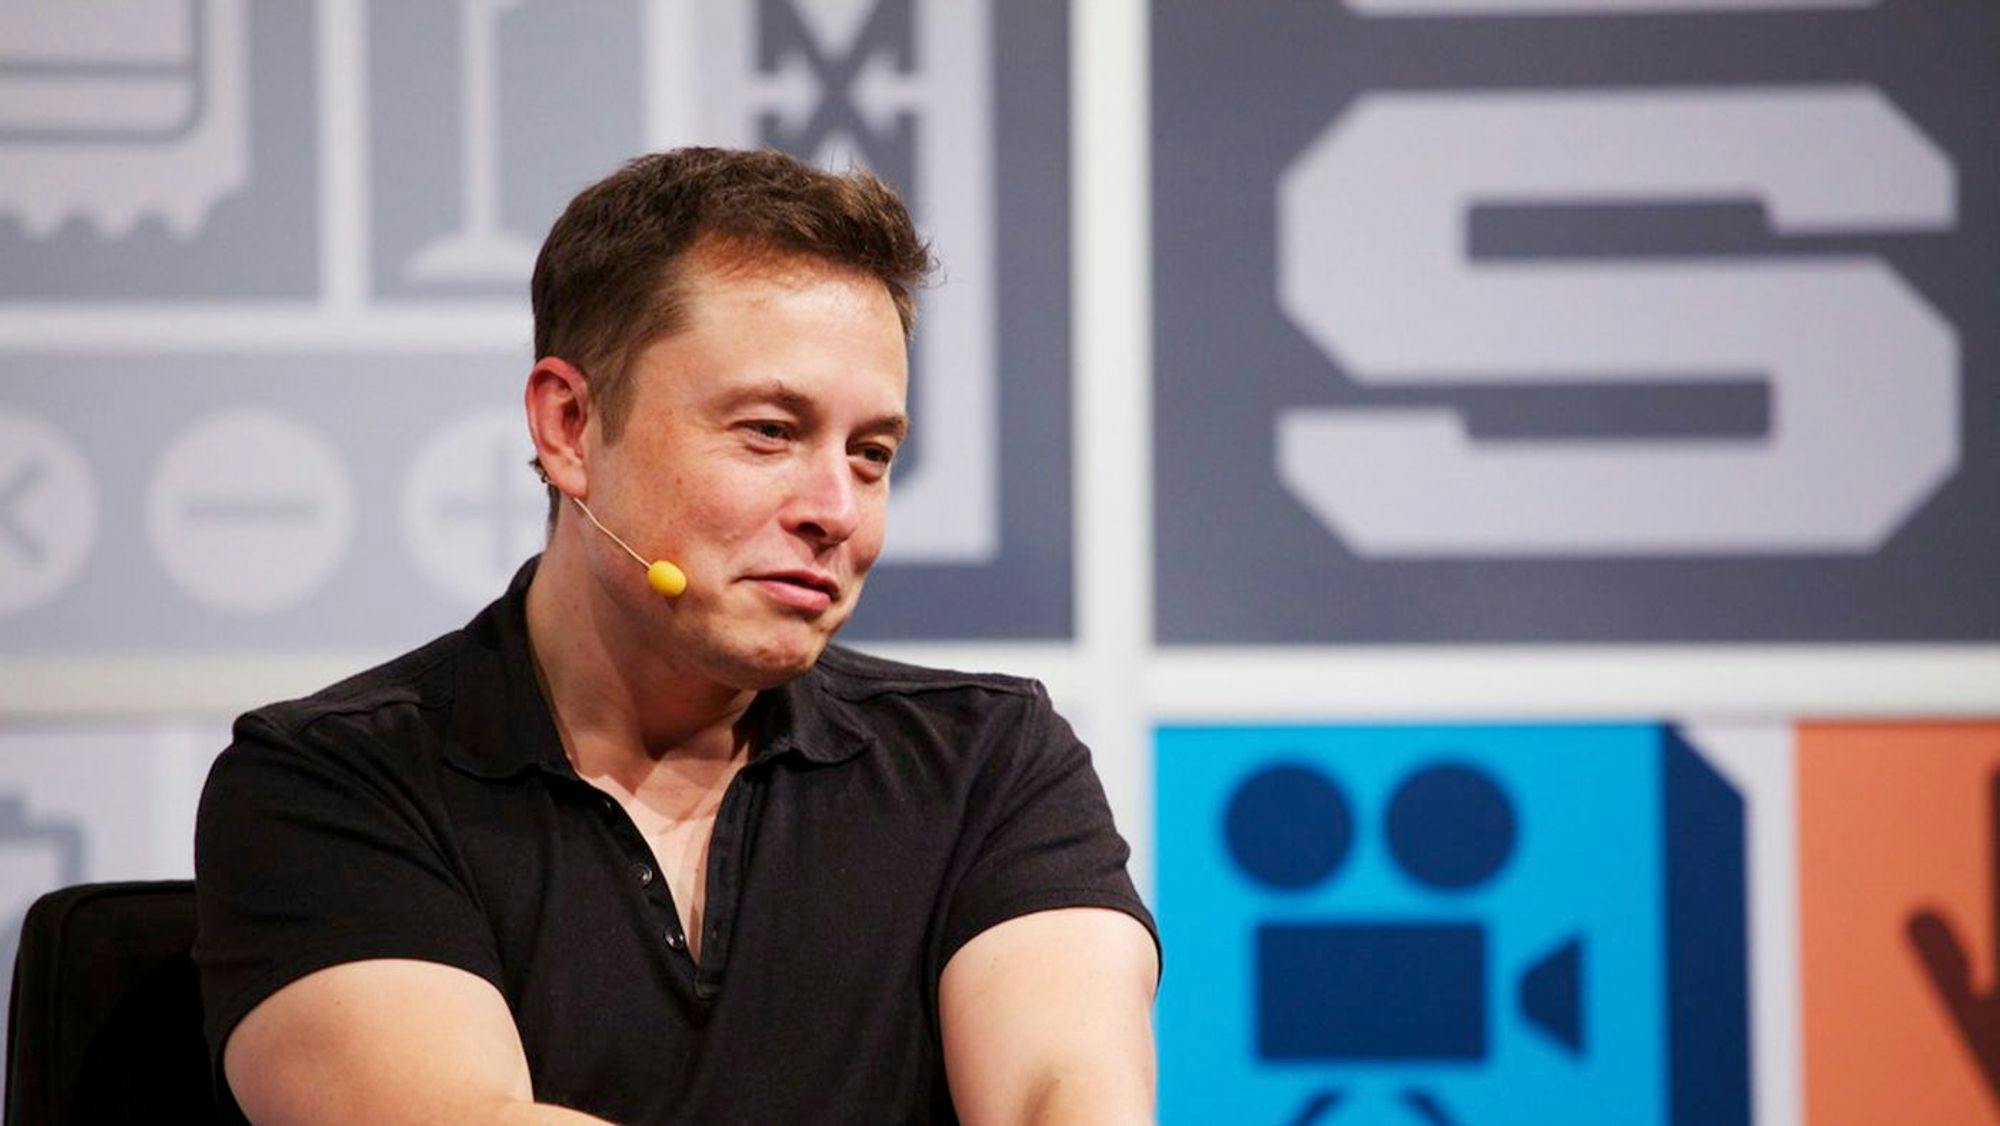 Elon Musk now owns X.com, the defunct domain of his second startup